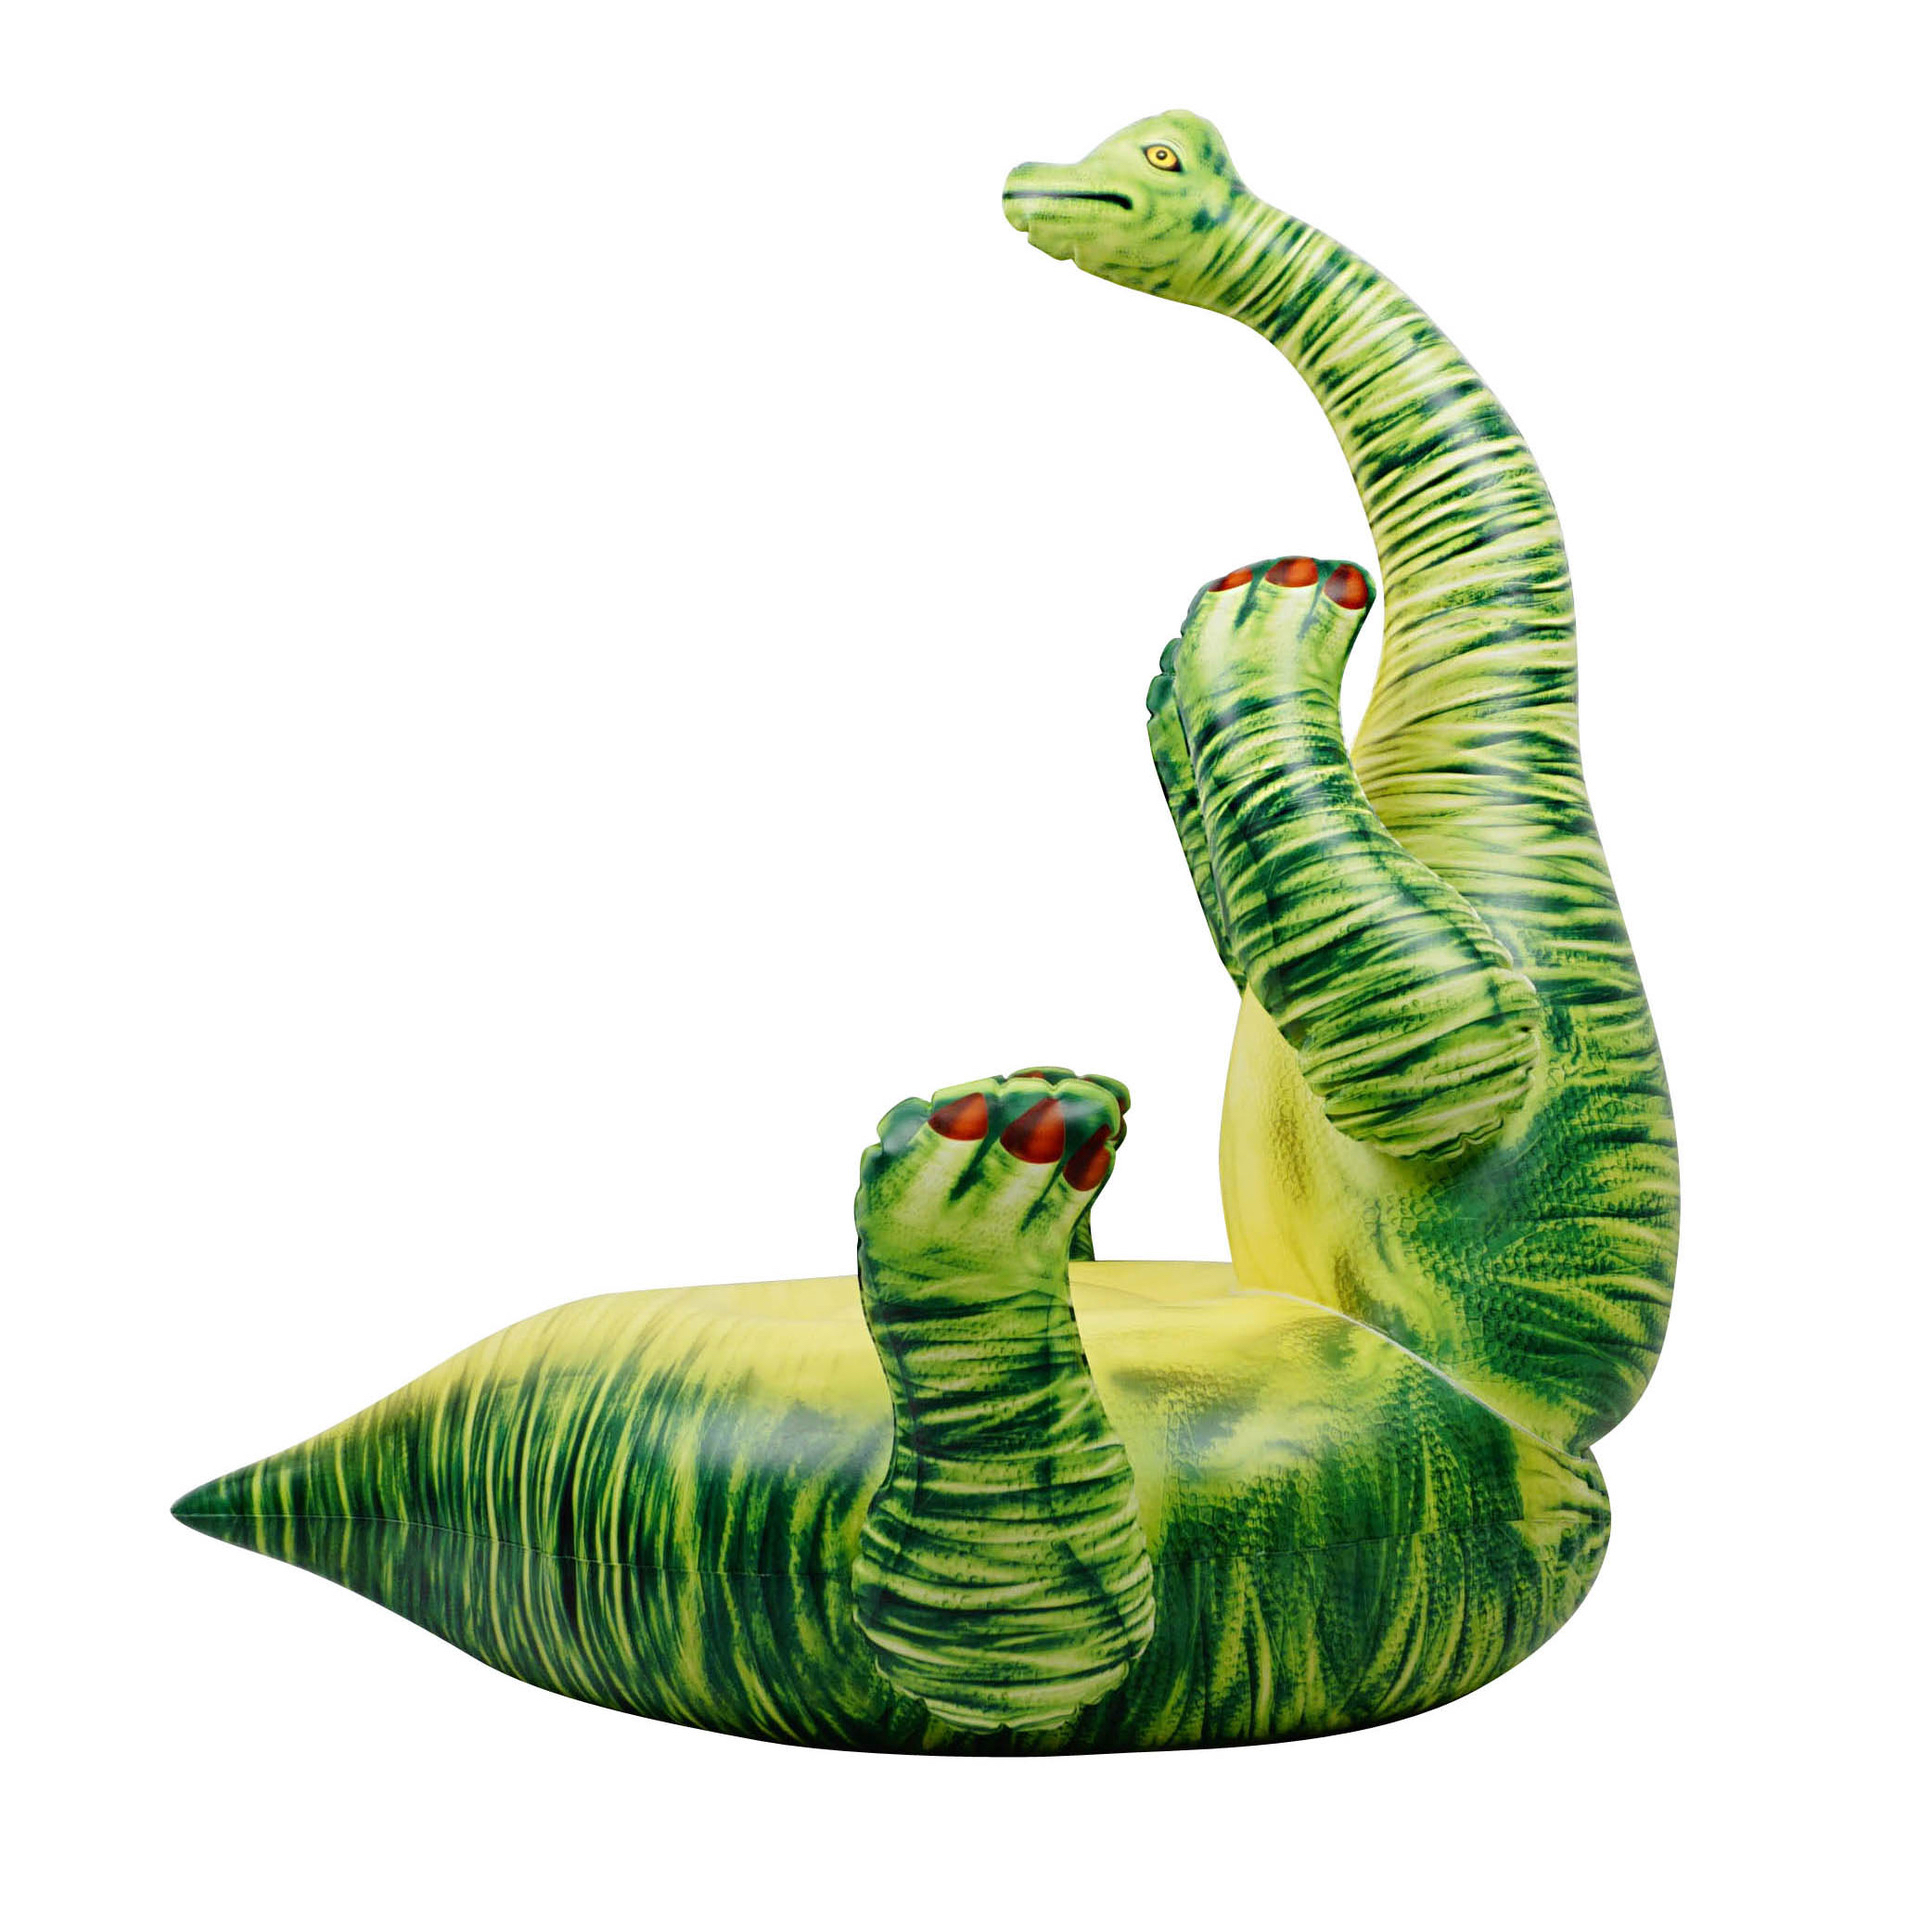 Explosive Children's Party Decoration Toys Pvc Material High Quality Realistic Dinosaur Chair Cartoon Inflatable Animal Sofa